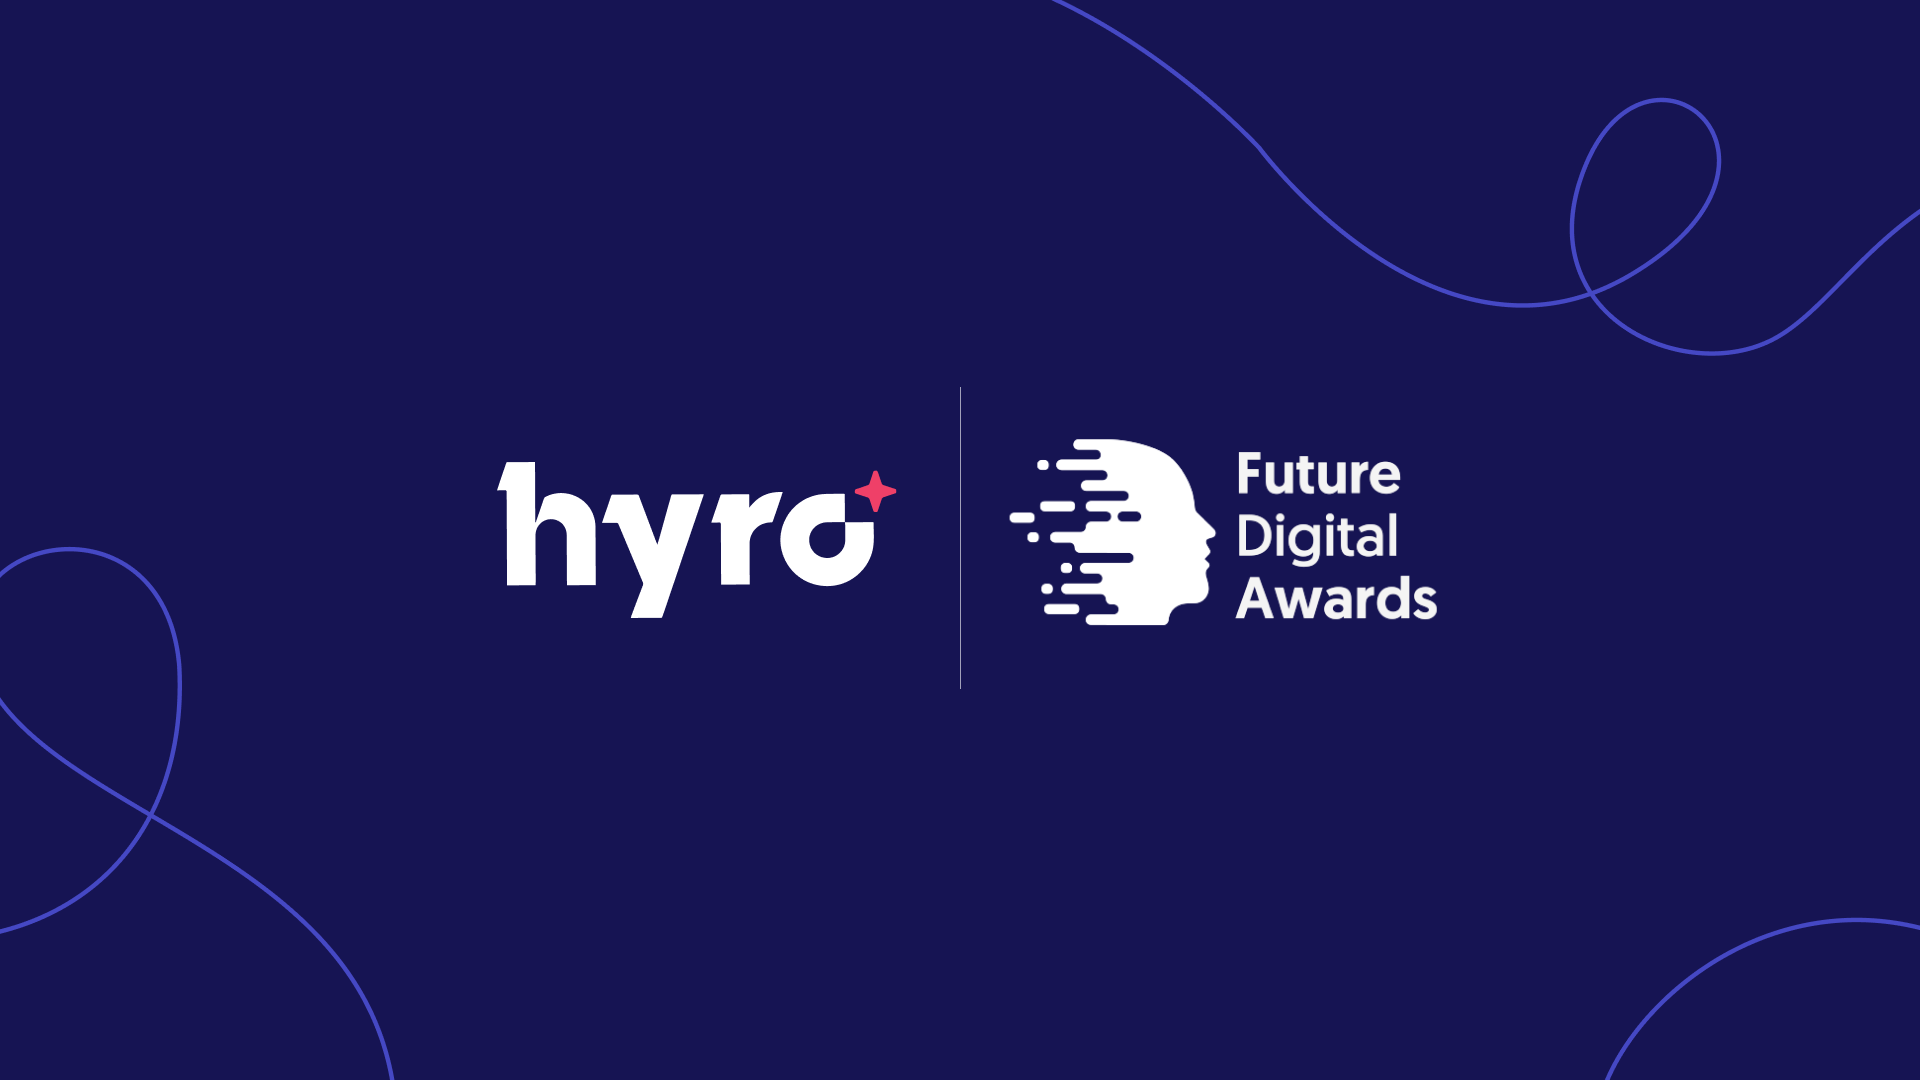 Hyro Wins Juniper Research’s Gold Award for Best AI Chatbot